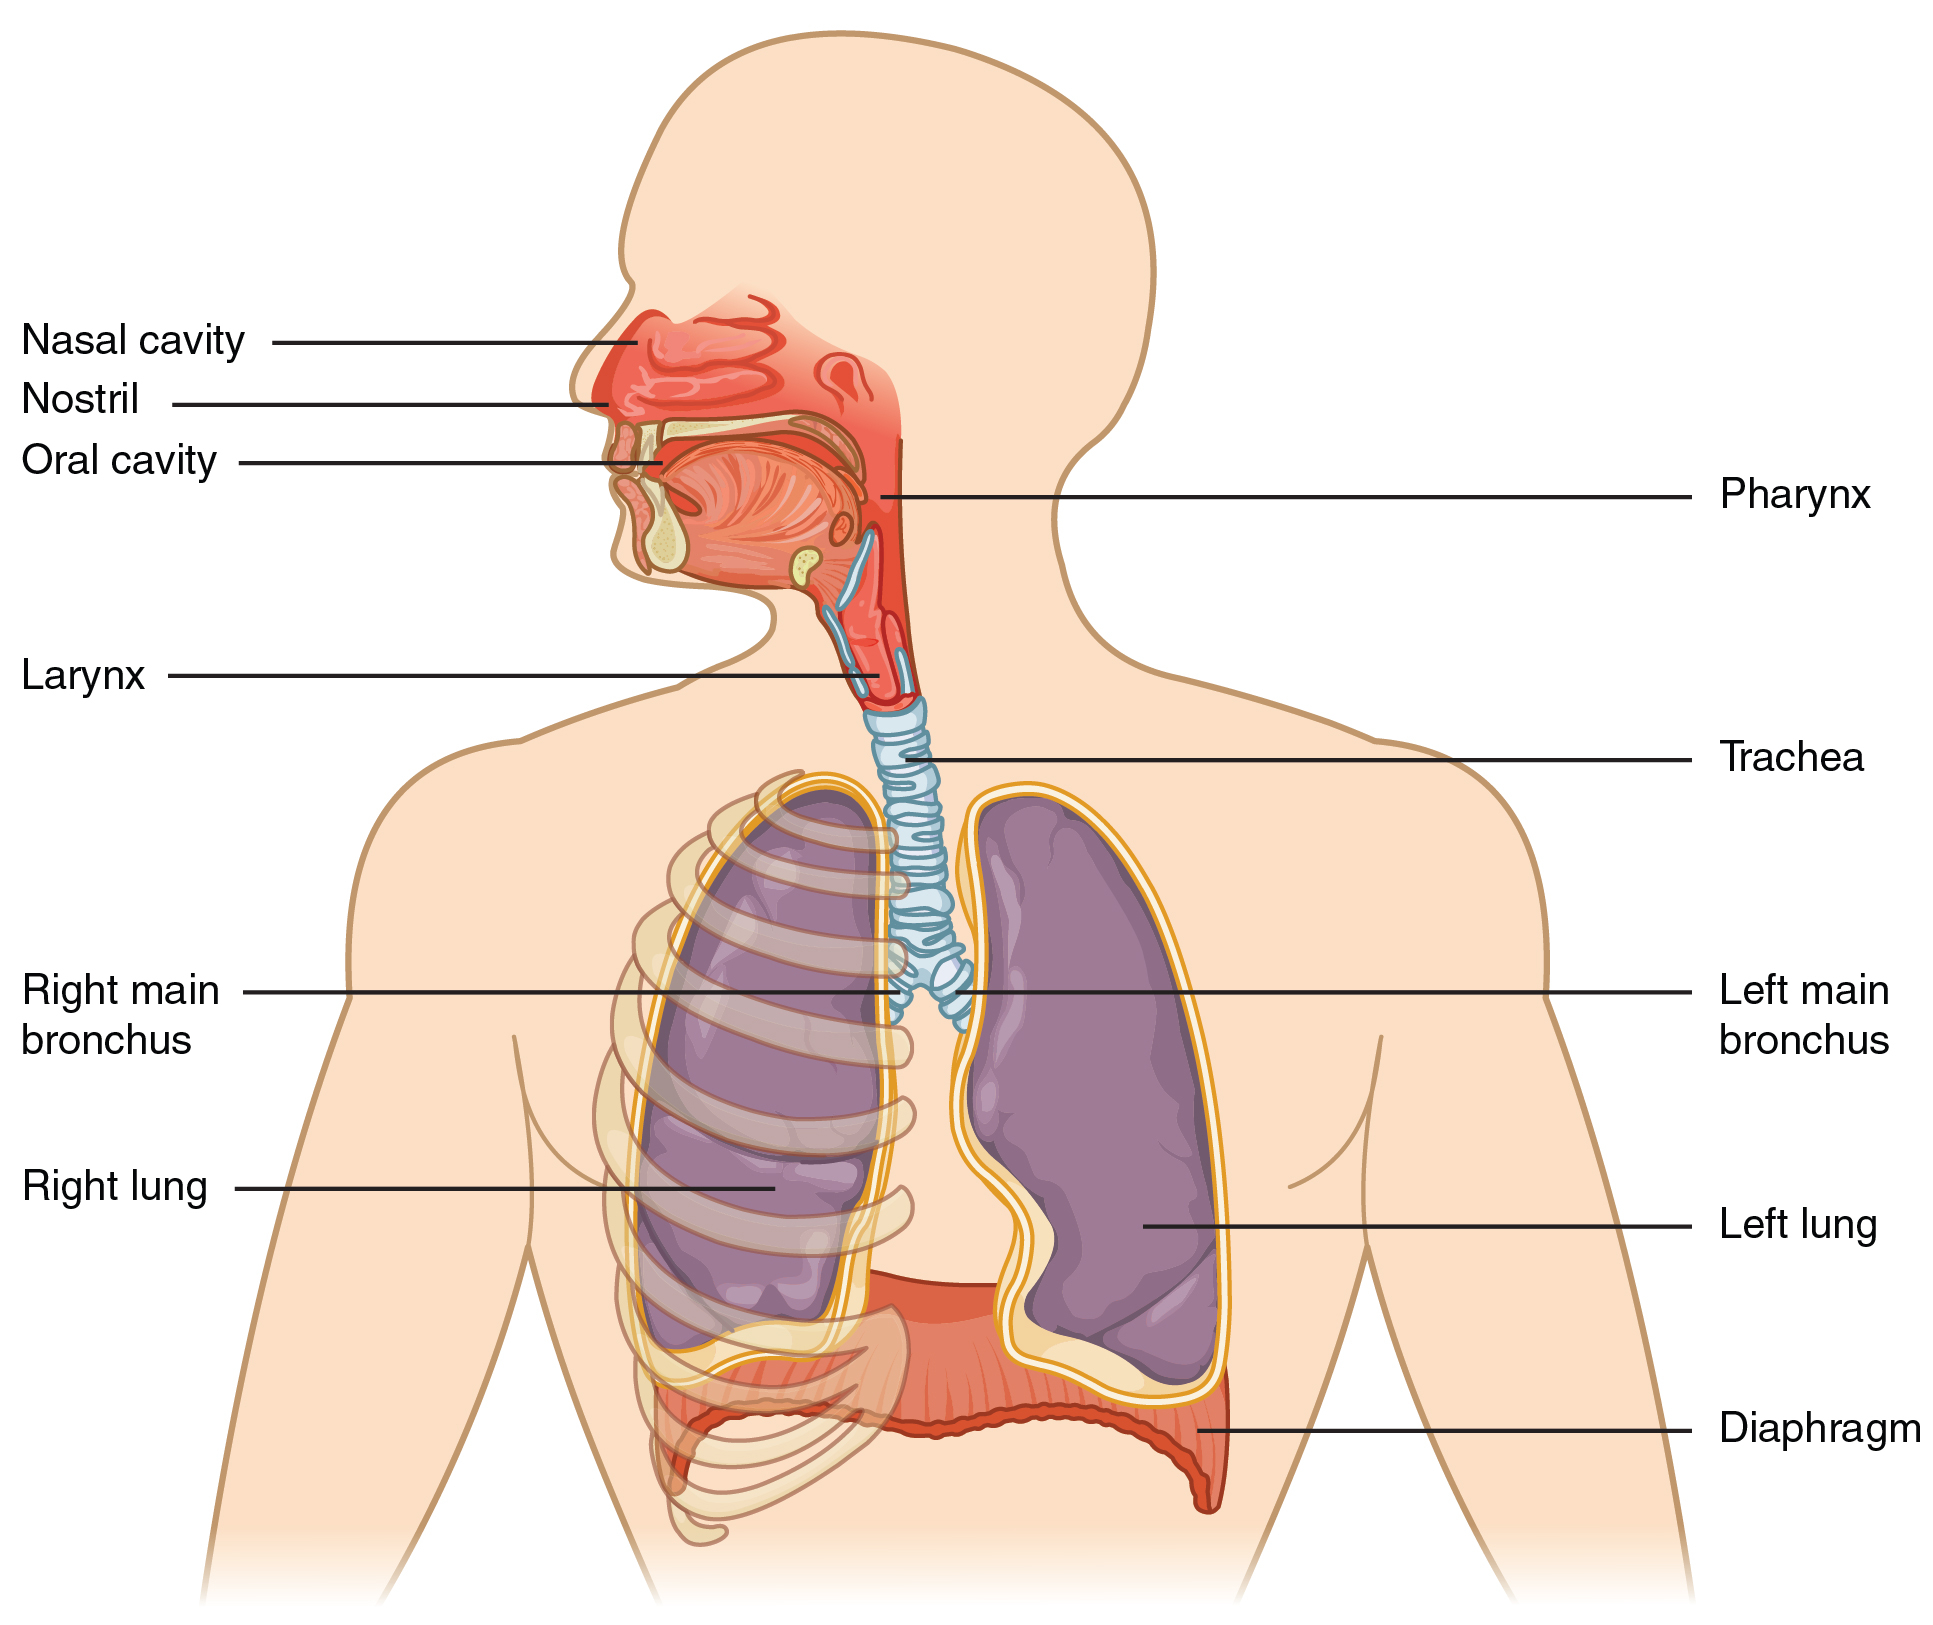 Diagram Of The Respiratory System 221 Organs And Structures Of The Respiratory System Anatomy And